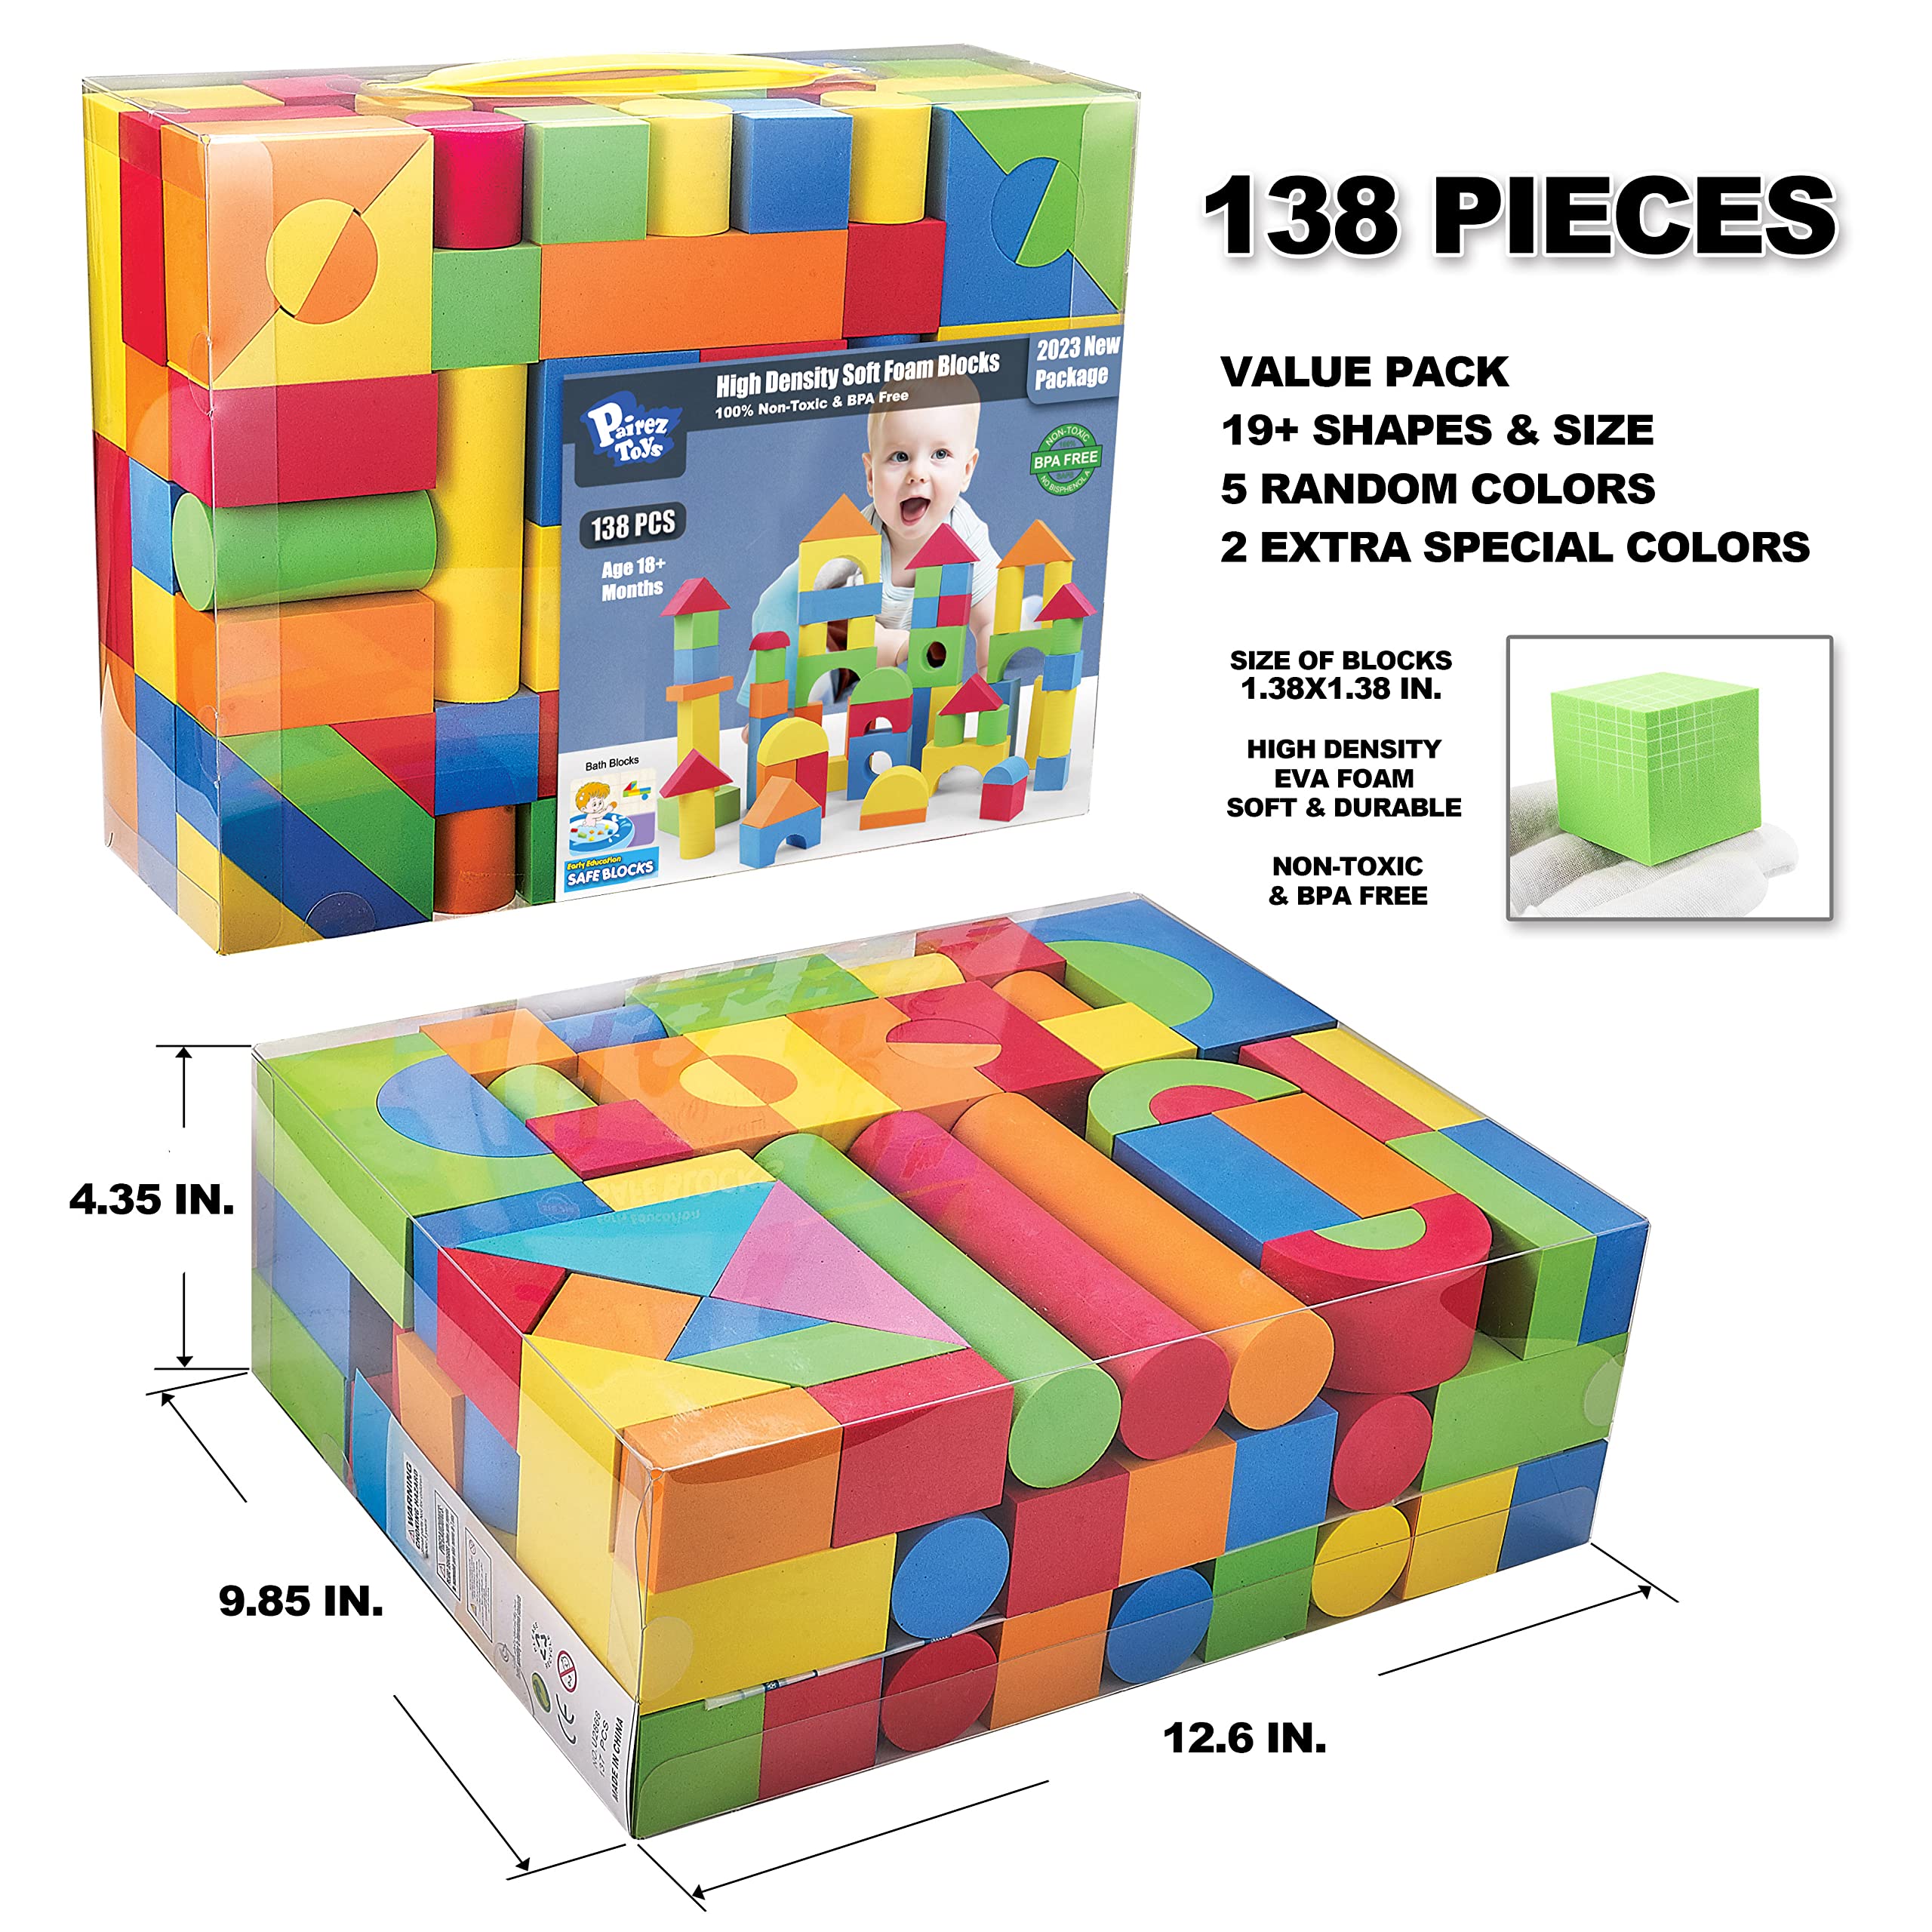 Foam Blocks for Toddlers, 138 Pieces EVA Soft Stacking Building Blocks Toy Set, Early Learning Construction Toys & Gifts for Kids, Boys & Girls 18+ Months 1-3 Years